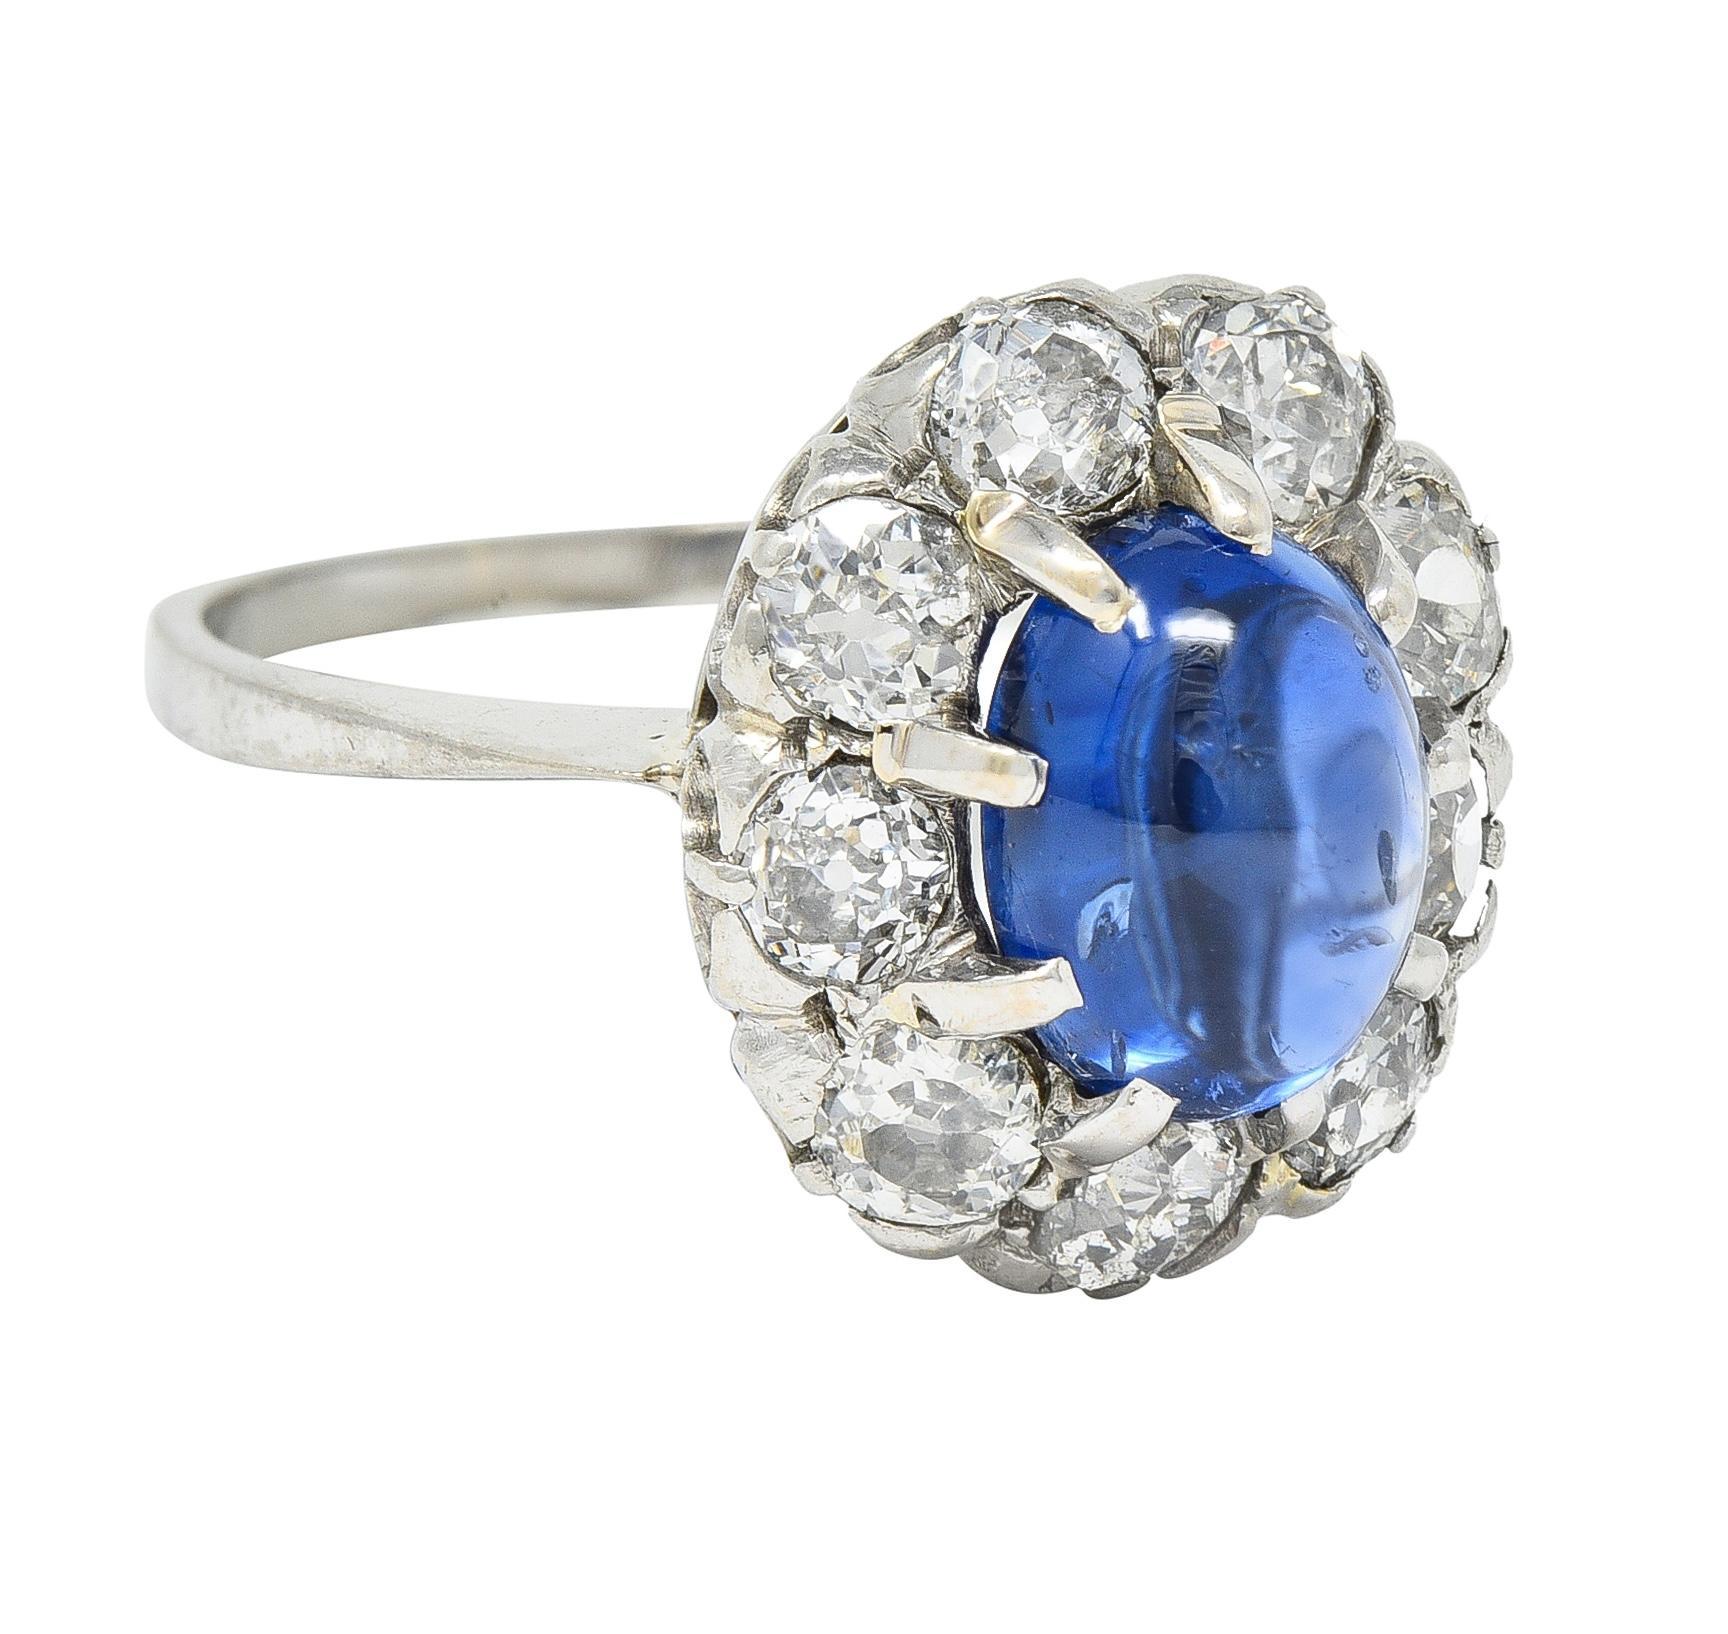 Centering an oval-shaped sapphire cabochon weighing approximately 2.44 carats 
Transparent medium blue in color - set with talon prongs with halo surround
Comprised of prong set old European and mine cut diamonds
Weighing approximately 1.08 carats